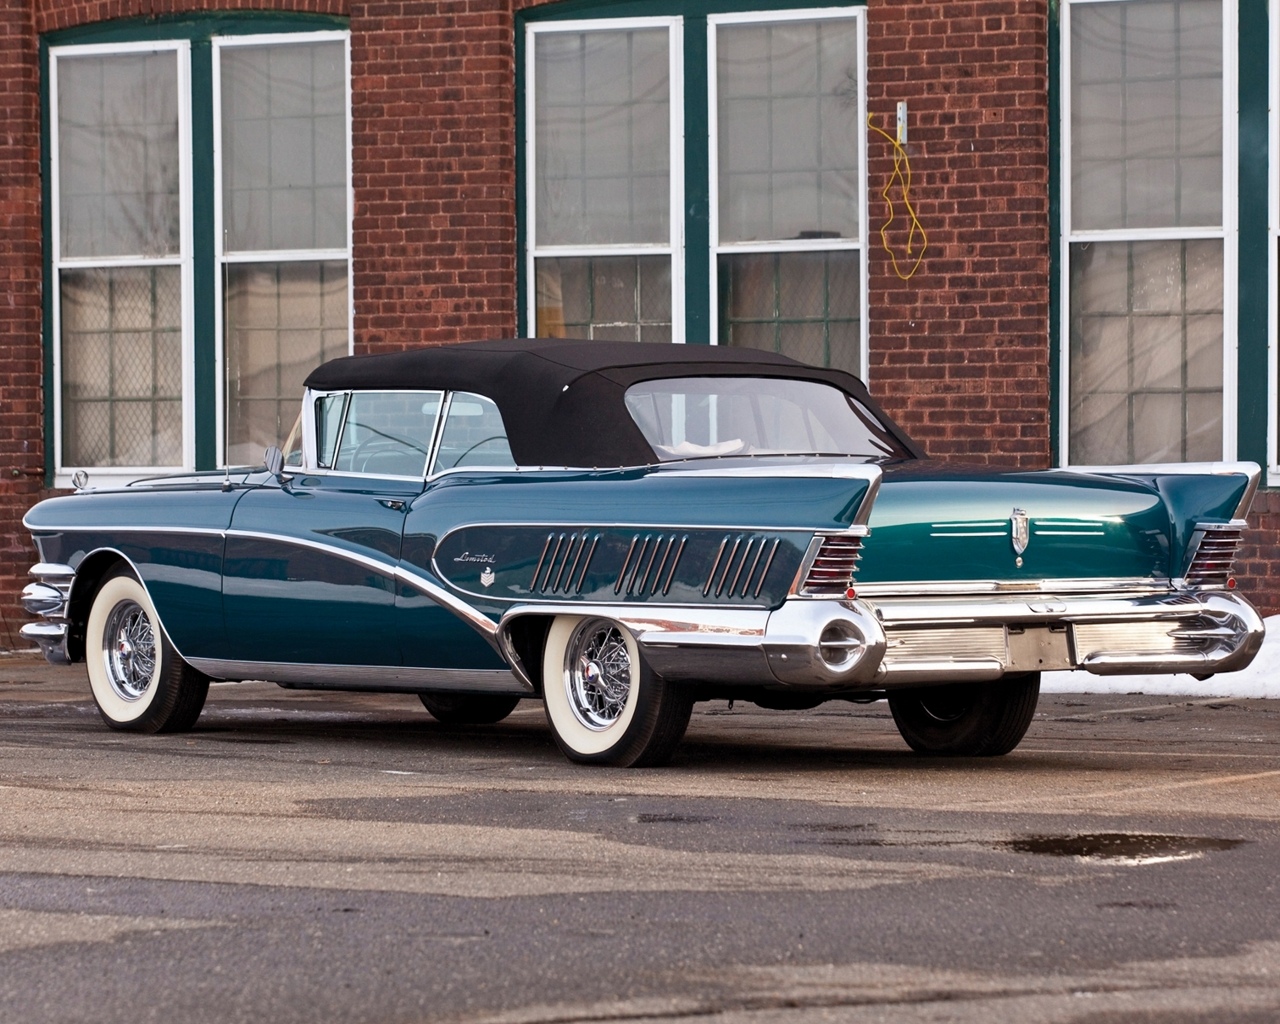 hd wallpapers 2012: American classic cars wallpapers